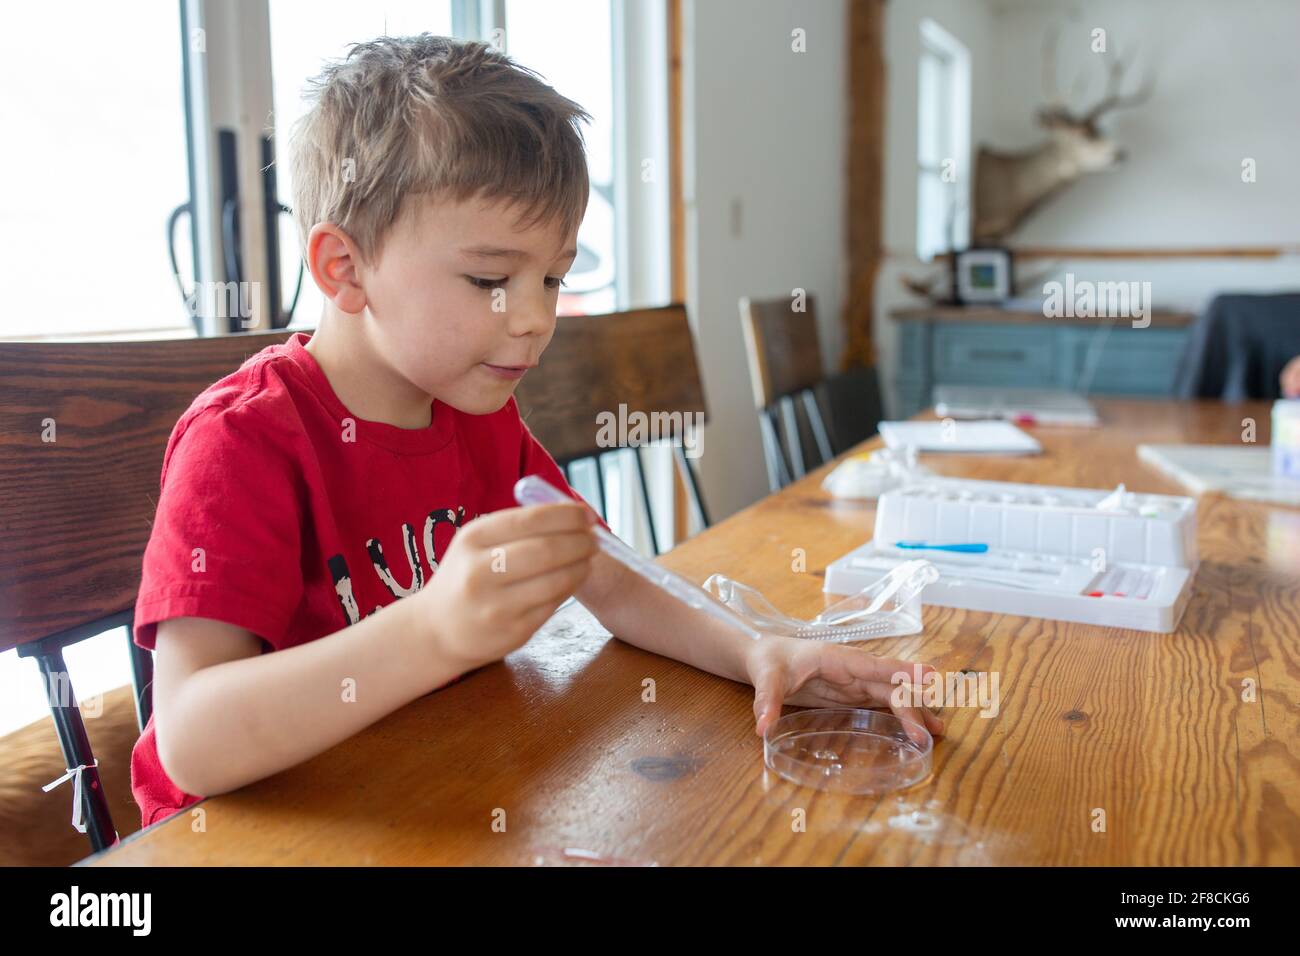 Boy doing science experiments at home at table Stock Photo